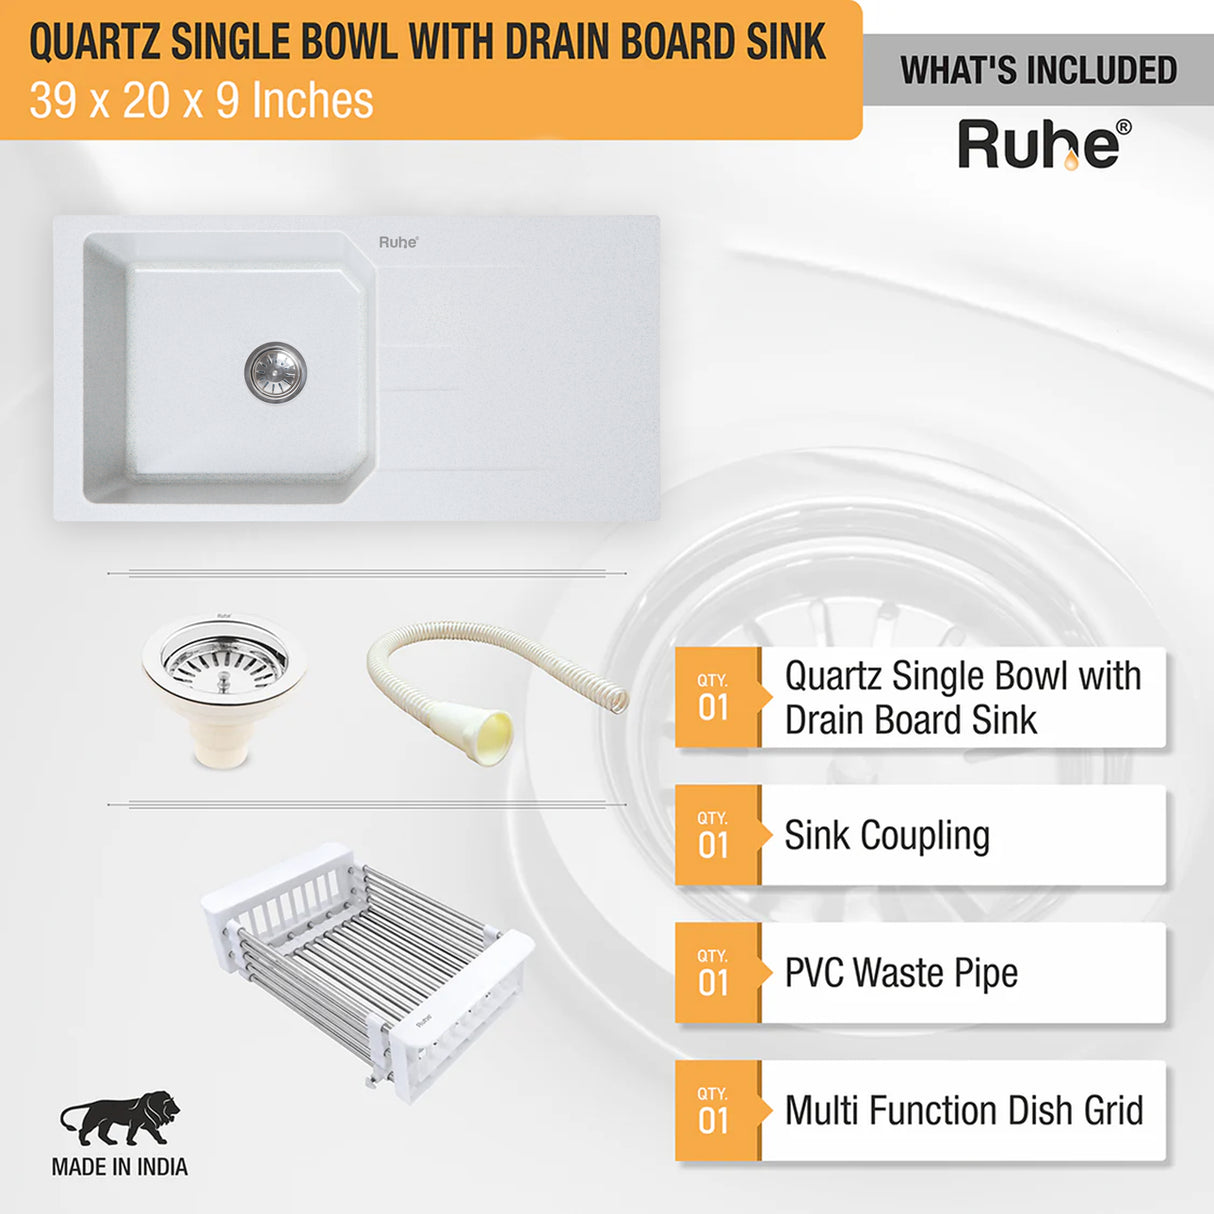 Quartz Single Bowl with Drainboard Kitchen Sink - Sand Pluto (39 x 20 x 9 inches) - by Ruhe®